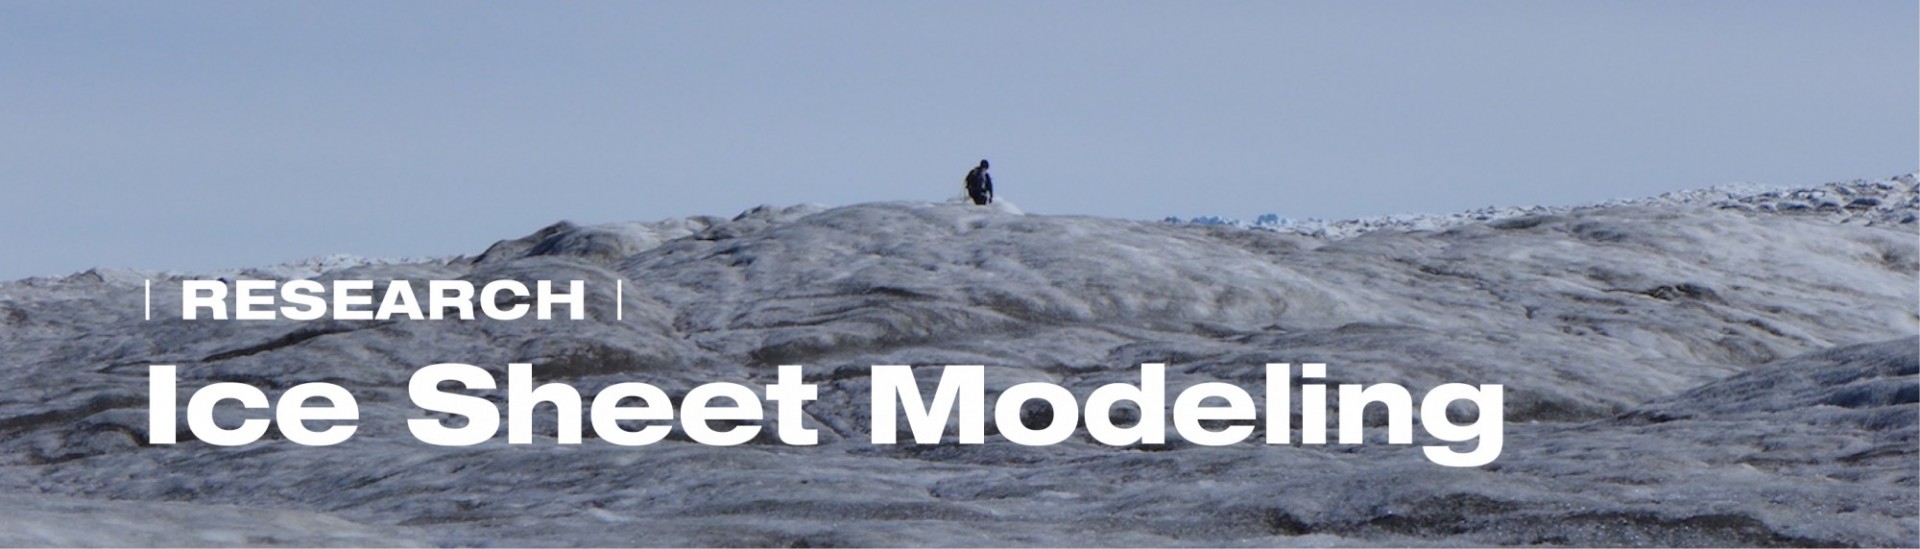 Greenland Ice Sheet - Research: Ice Sheet Modeling